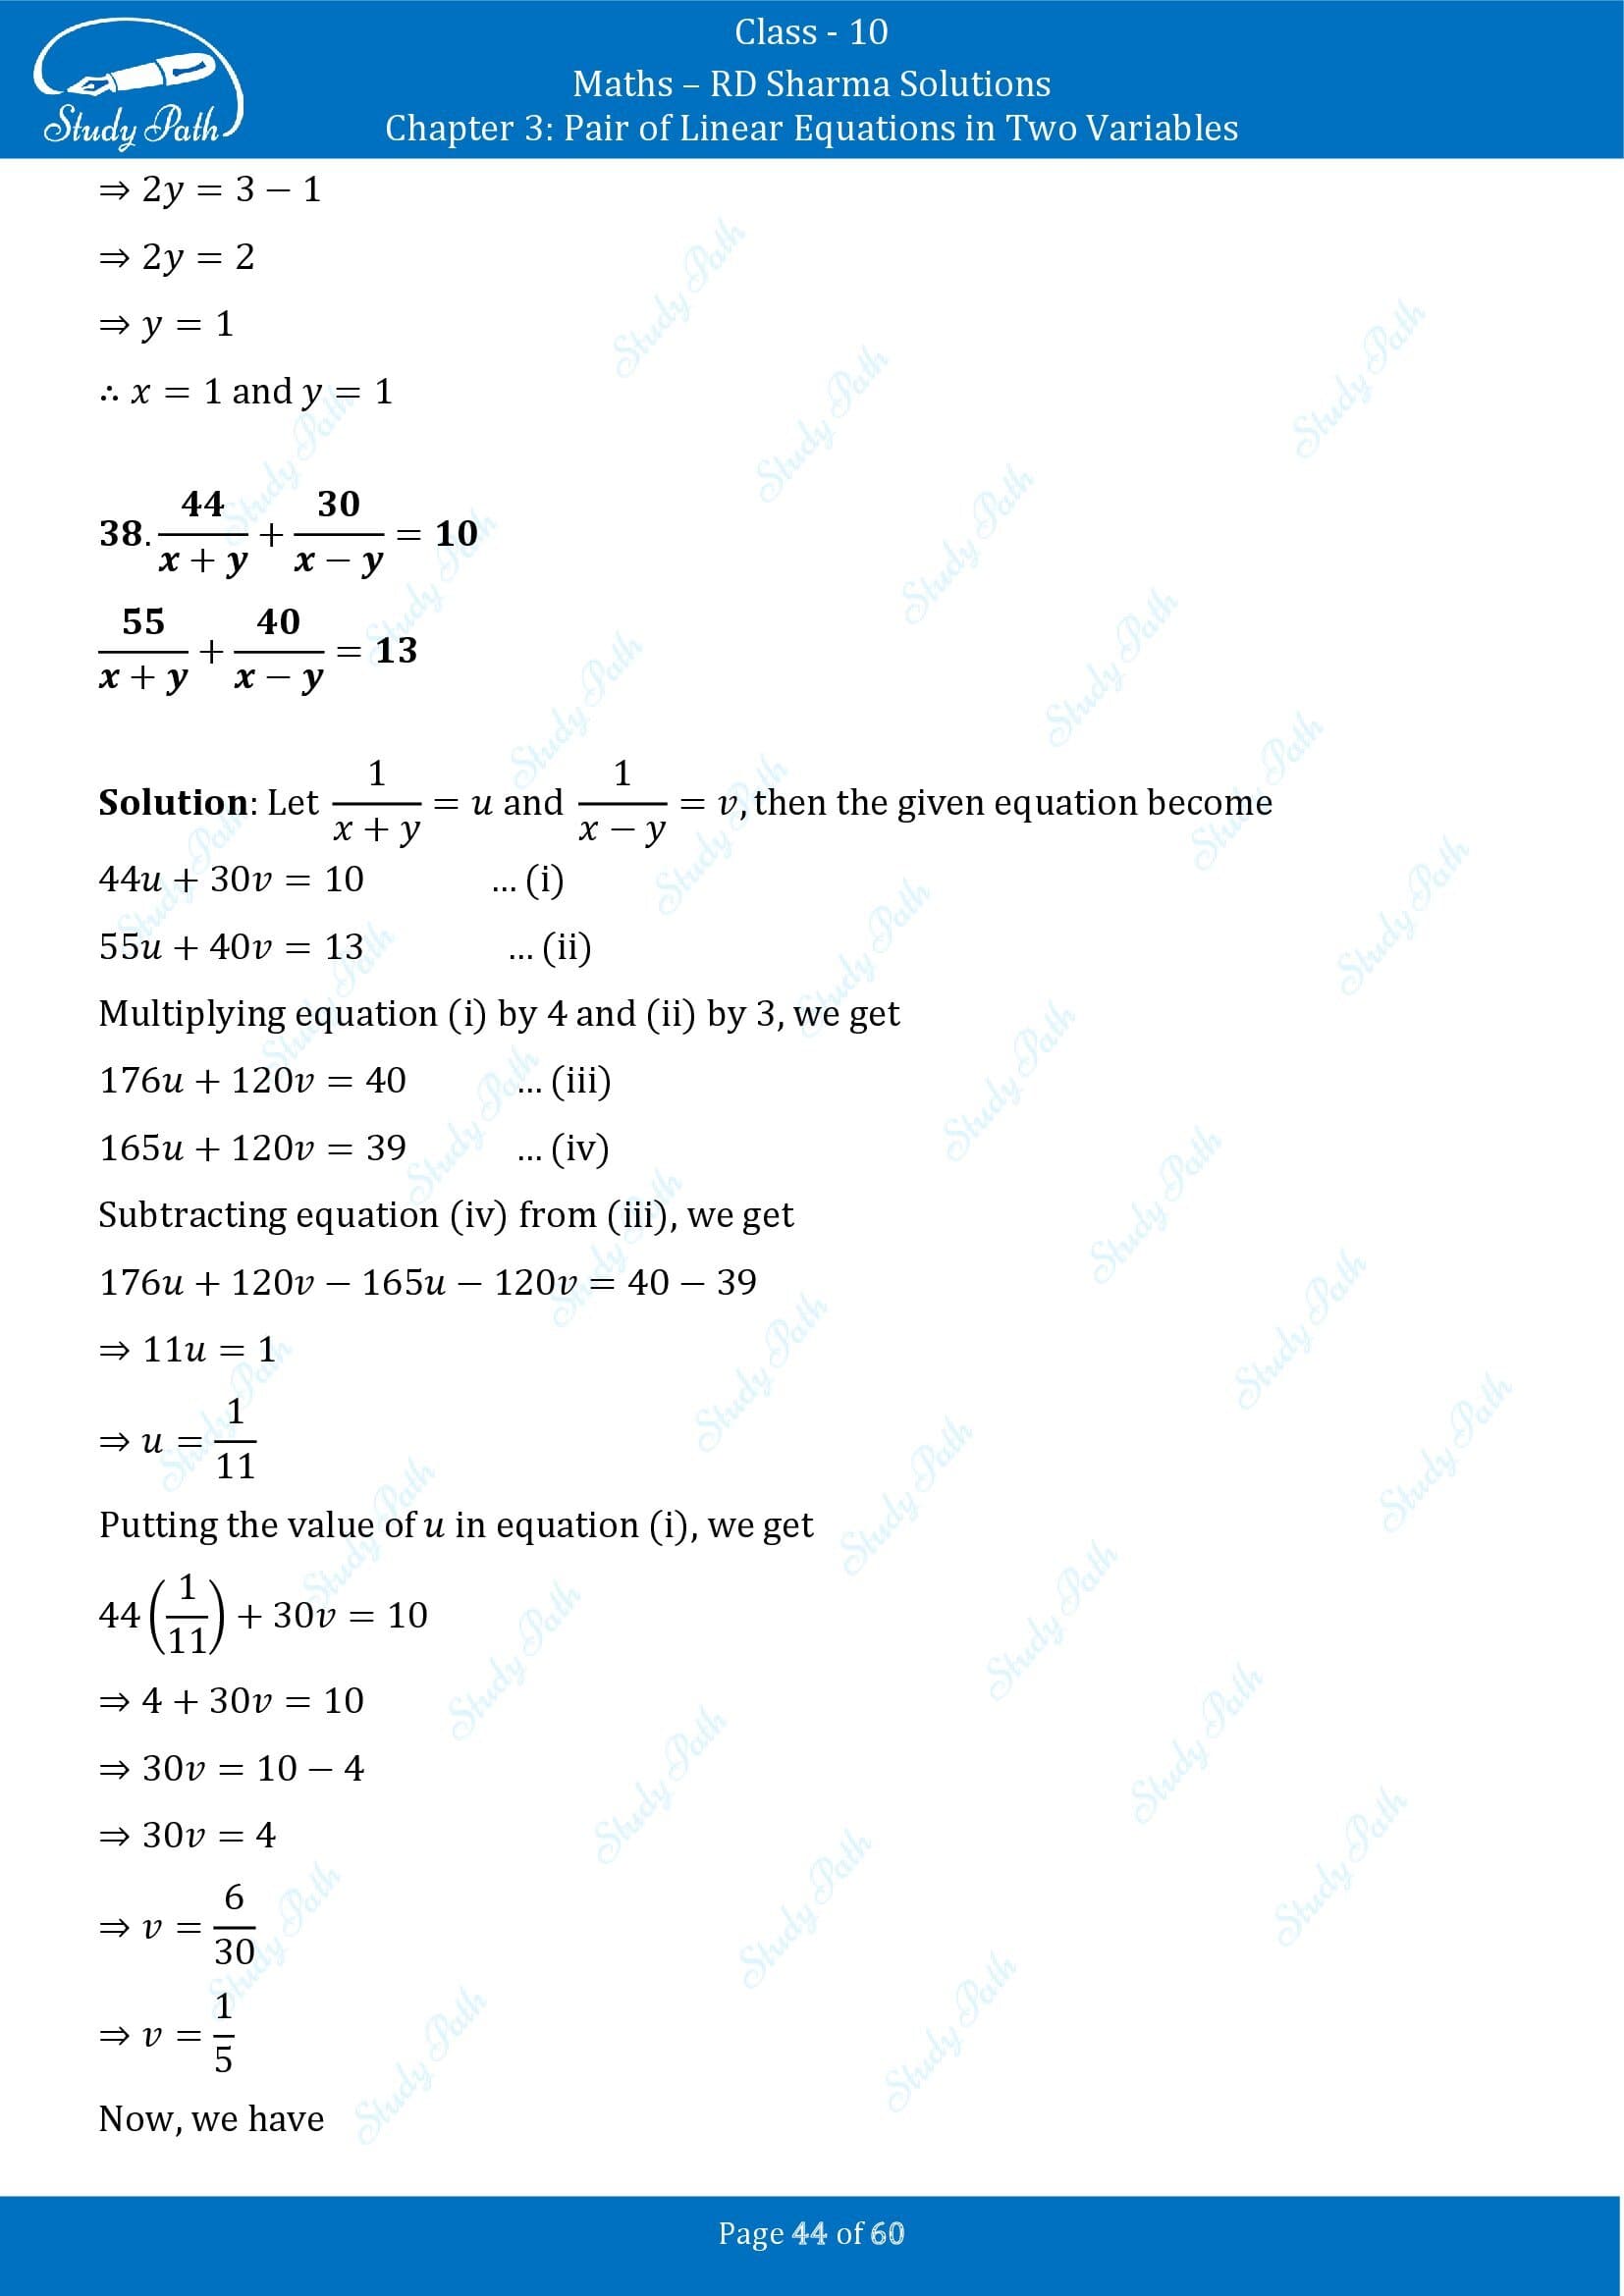 RD Sharma Solutions Class 10 Chapter 3 Pair of Linear Equations in Two Variables Exercise 3.3 00044